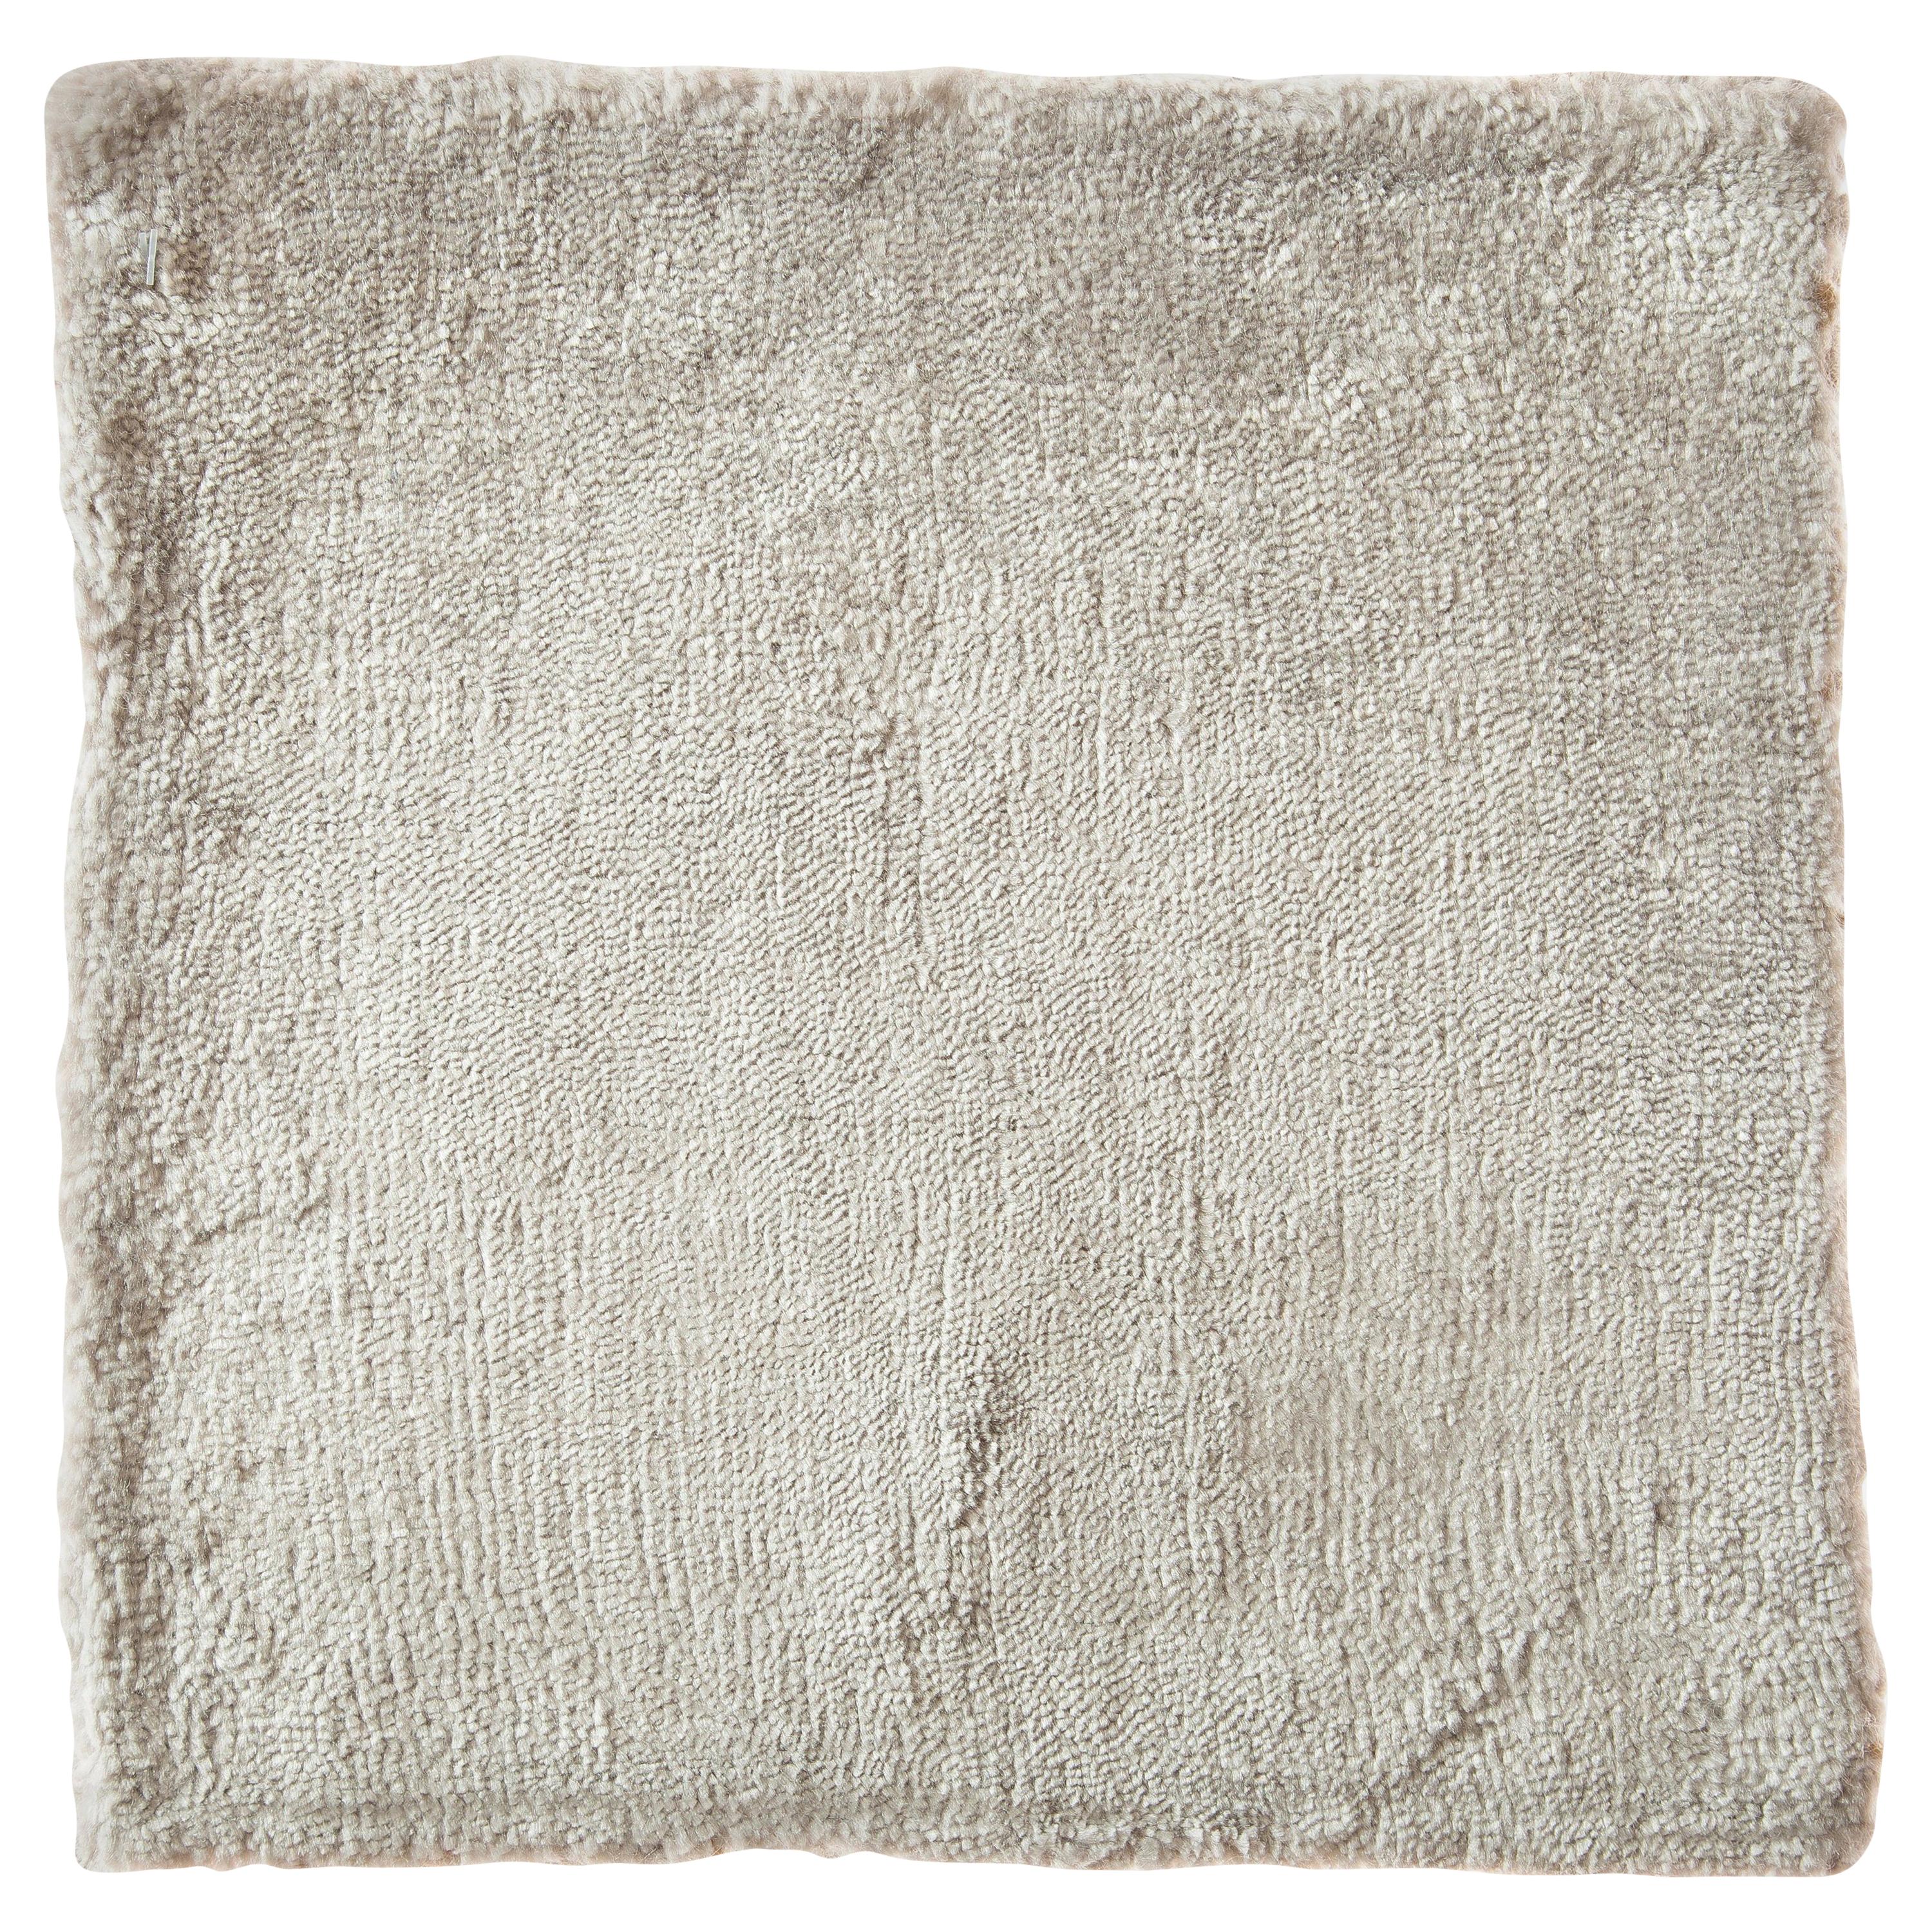 Contemporary Cream with Silver Tonal Hand-Loomed Bamboo Silk Rug